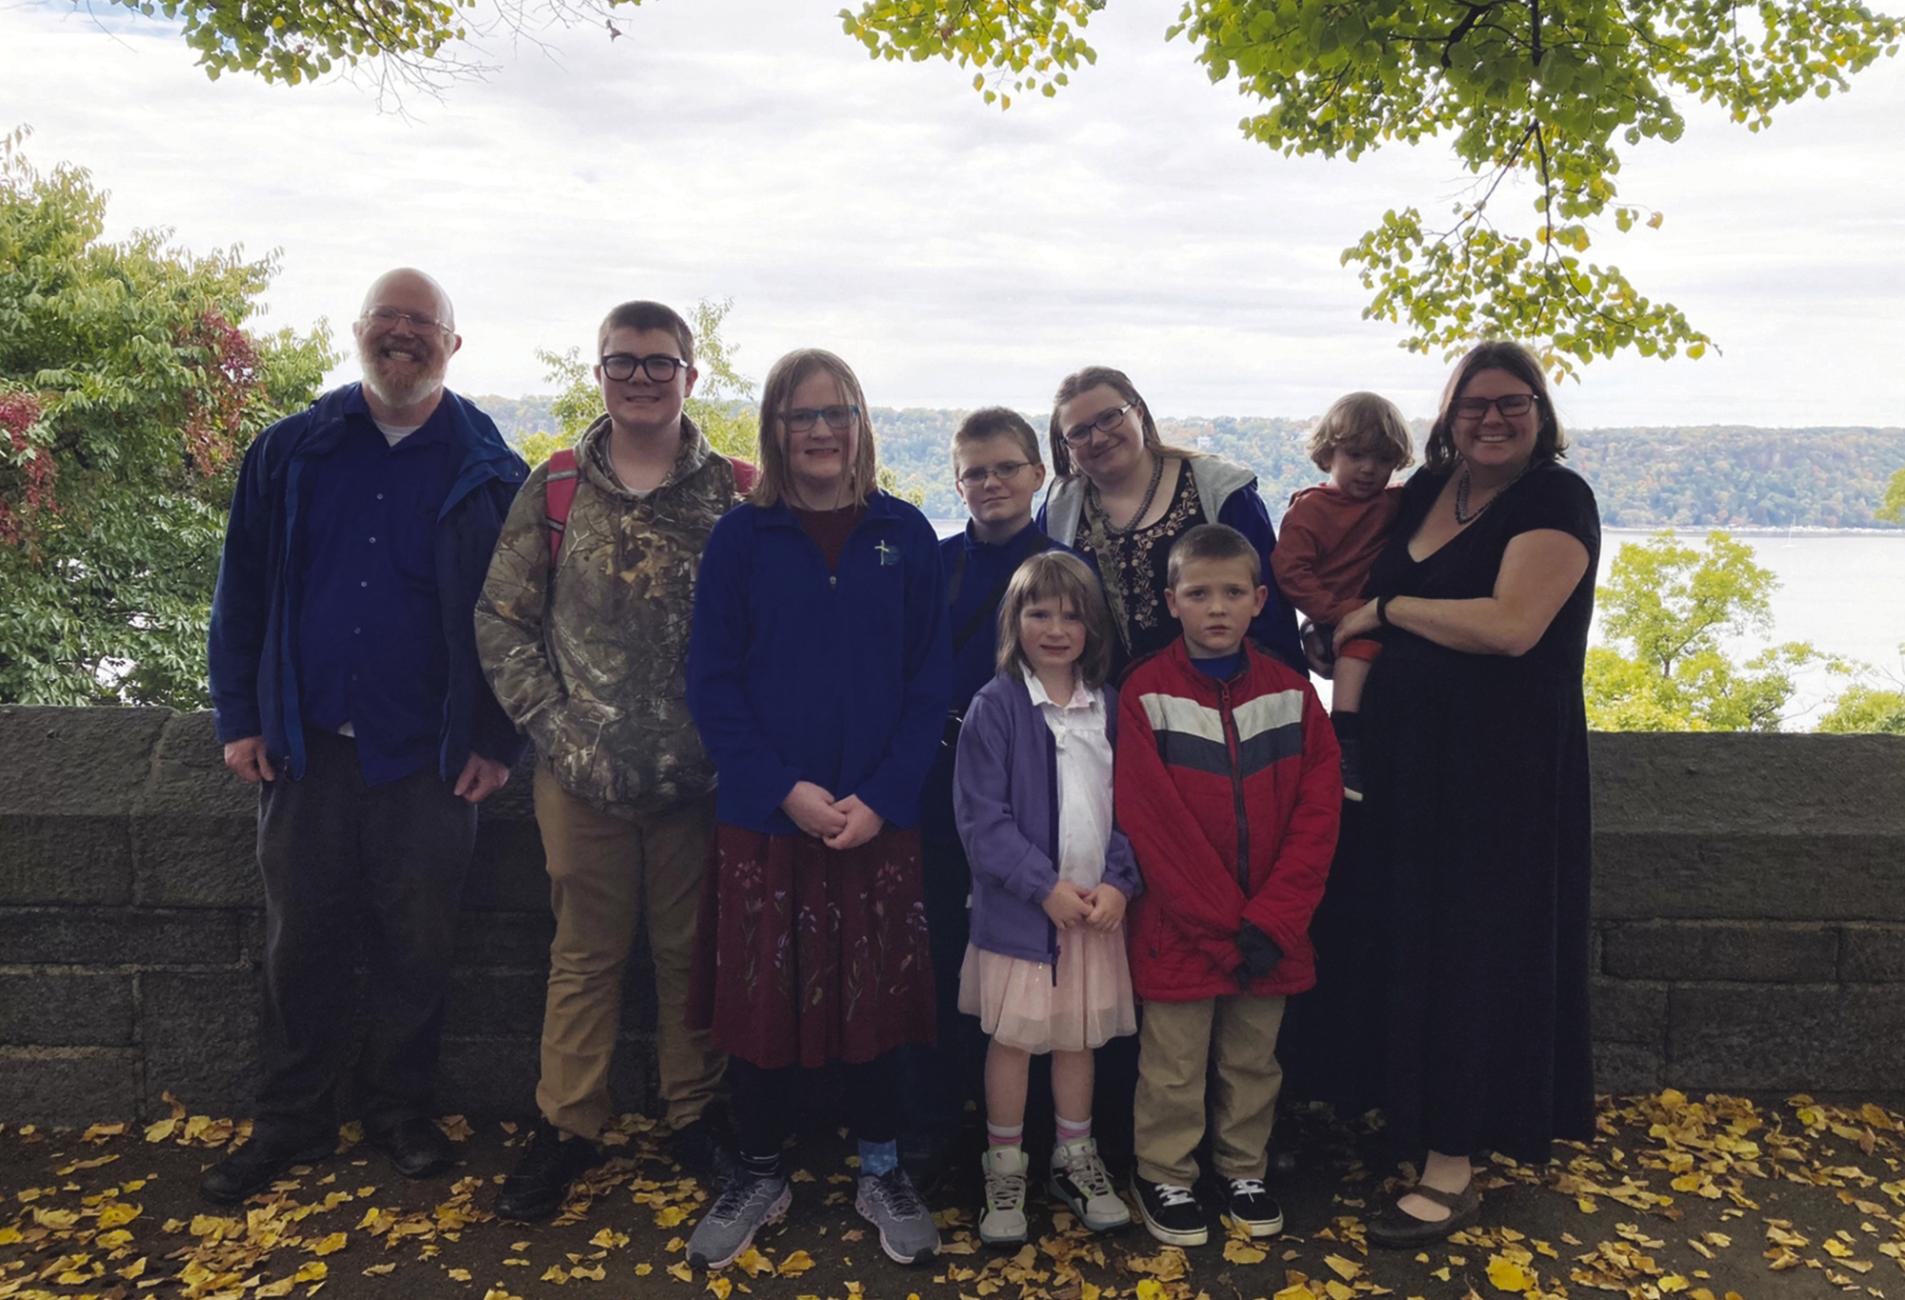 John Mundy, AB’01, and Deirdre Mundy, AB’99, on a college tour with seven of their eight children (left to right): Ben, Ada, Max, Ella, Cecilia, Henry, and Charles. 